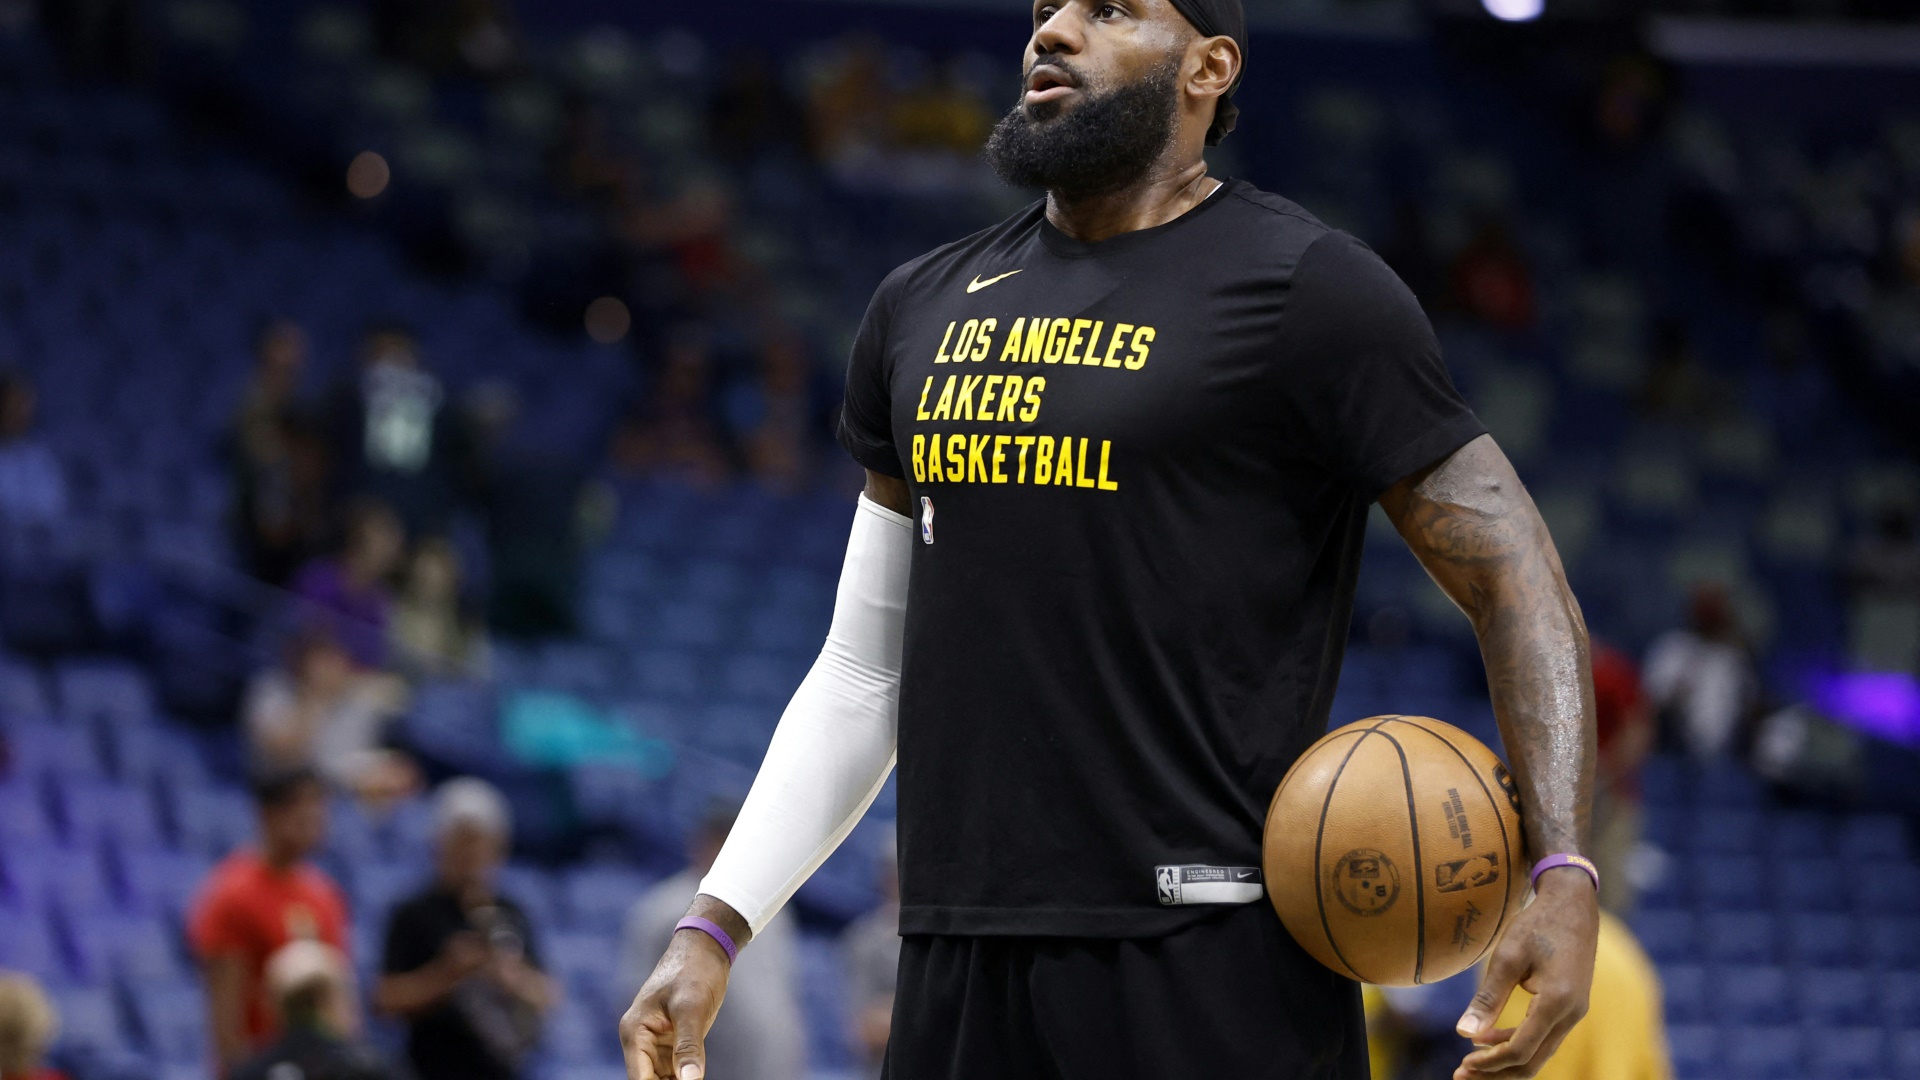 Will sein drittes Olympia-Gold: LeBron James